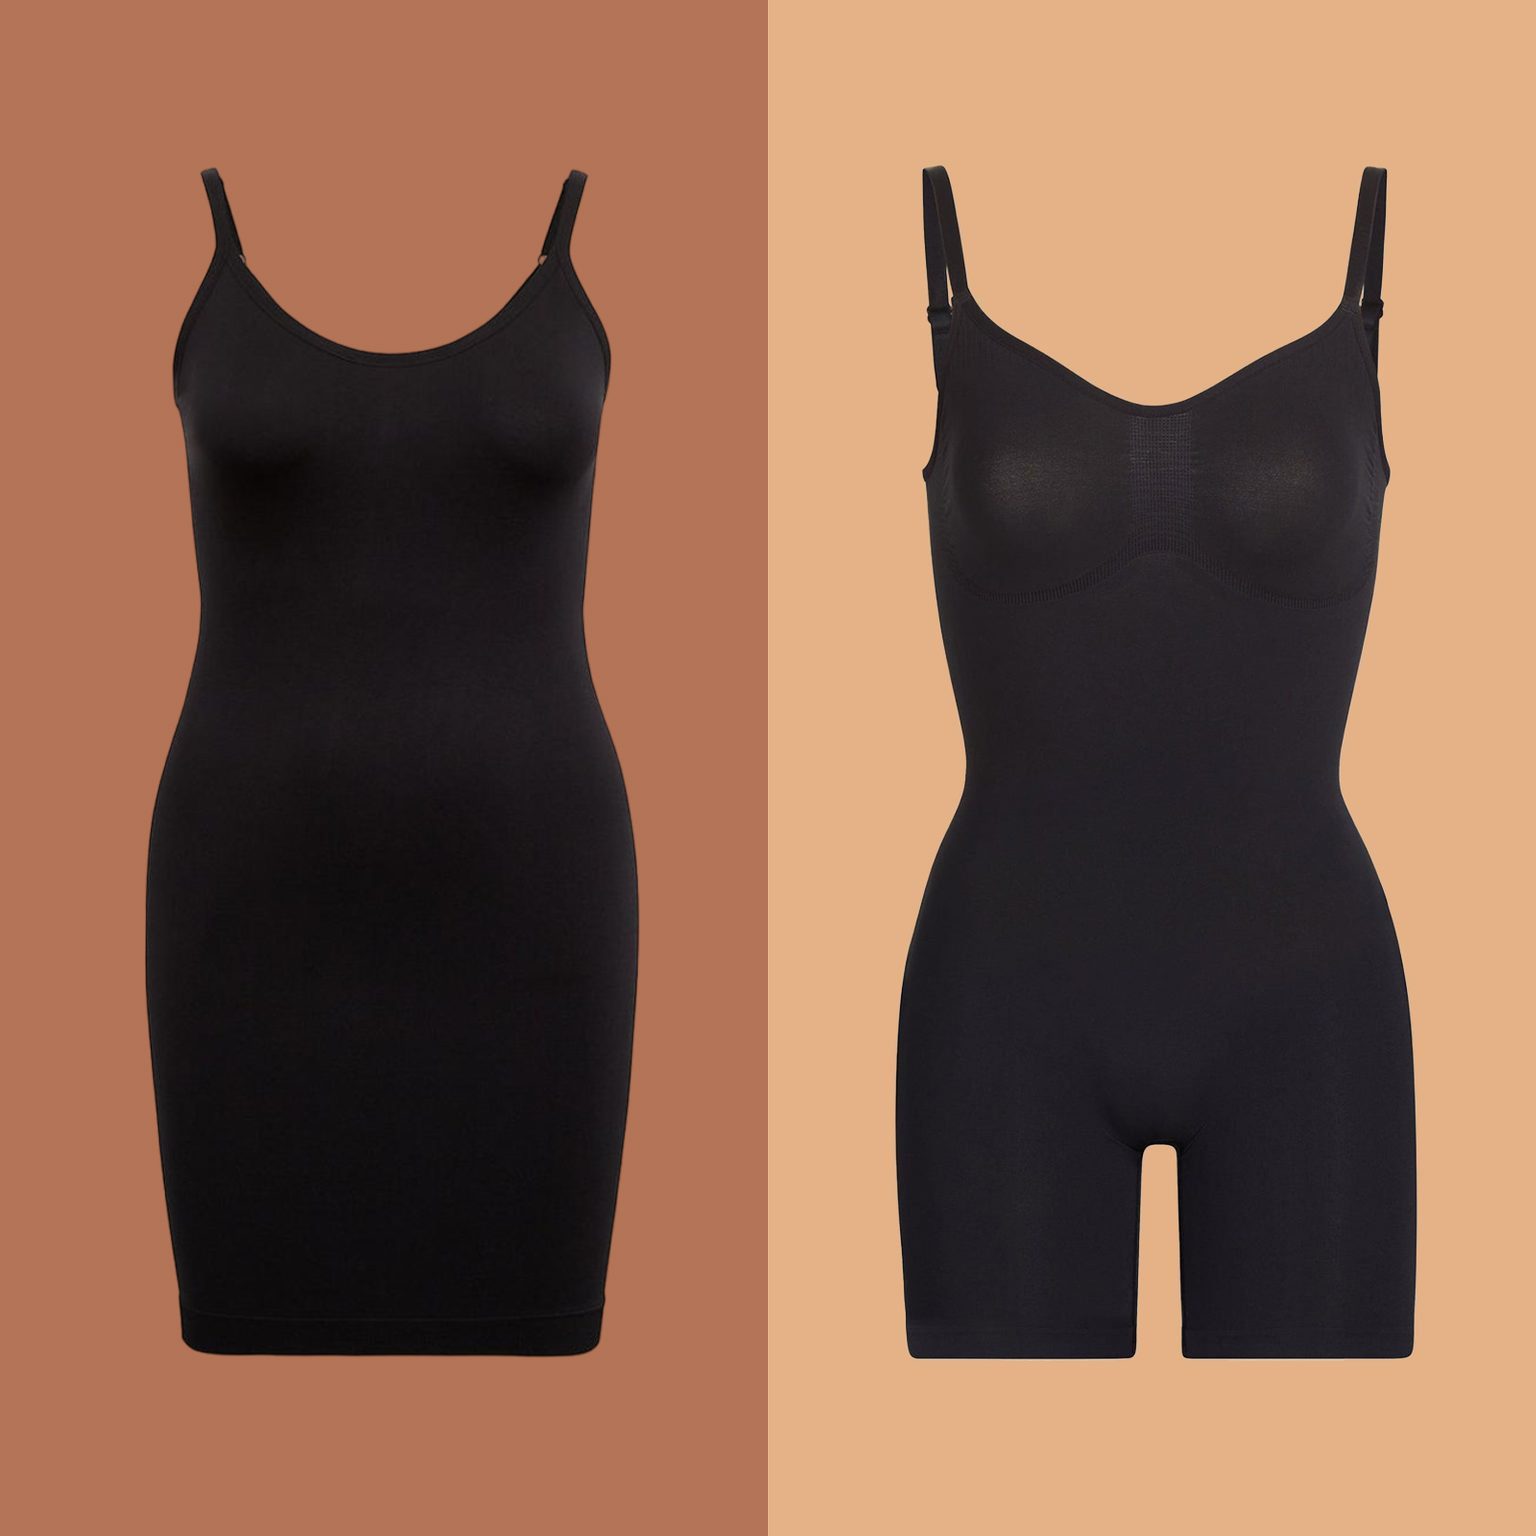 Fall in Love with Well-Designed Shapewear - A Mum Reviews